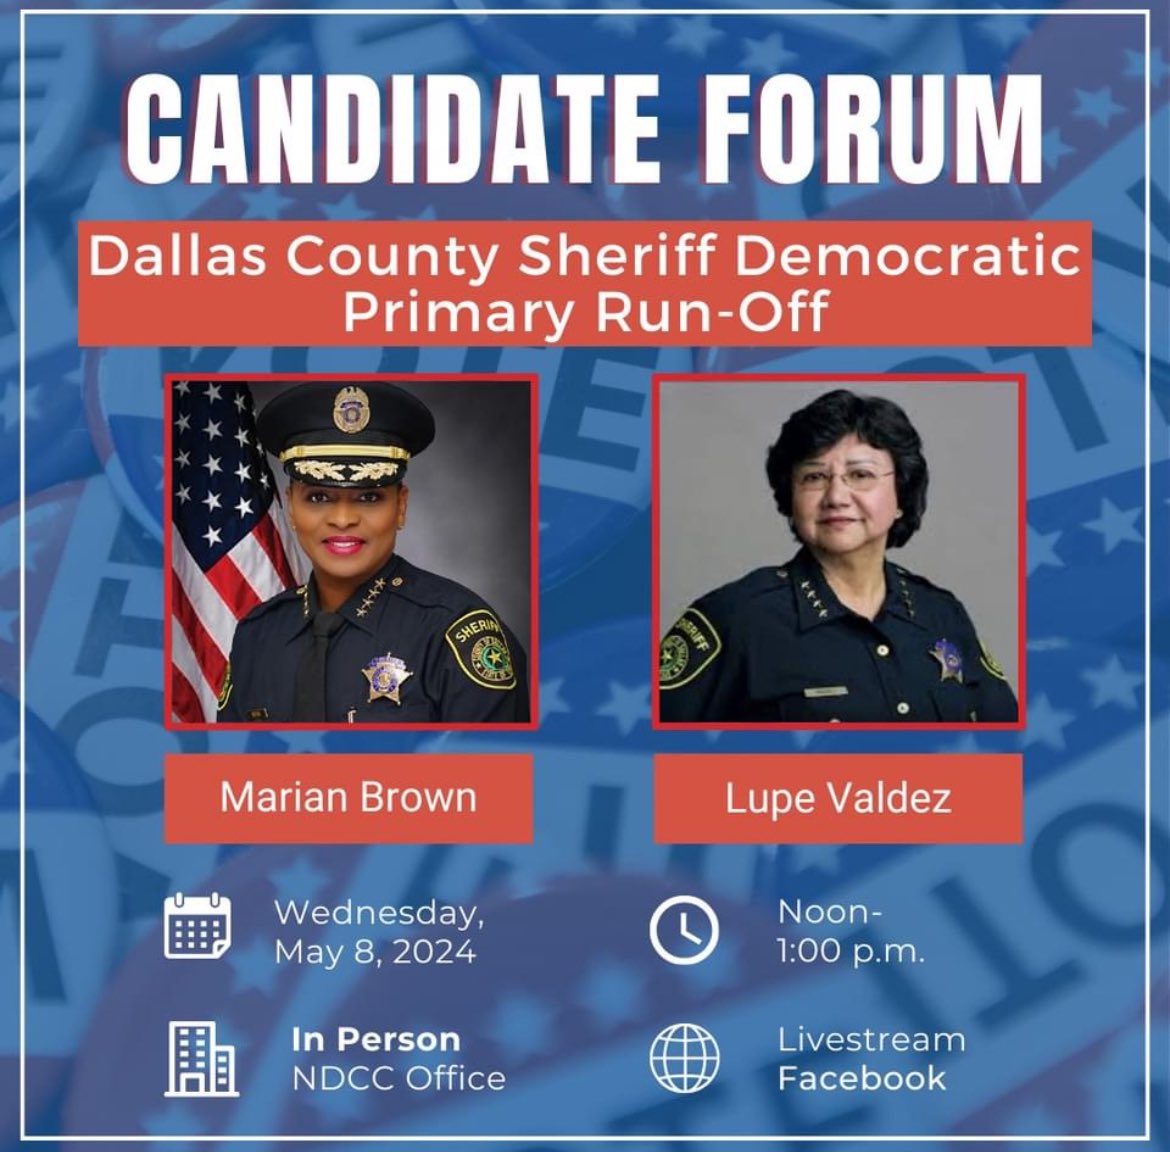 With Election Day in the municipal cycle passing on Saturday, we’re now back into partisan primary run-off elections. Candidate forum tomorrow for Dallas County Sheriff co-hosted by @NDCC, @lwvdallastx, and @EngageDallas_. I’m moderating the forum. Send any questions!